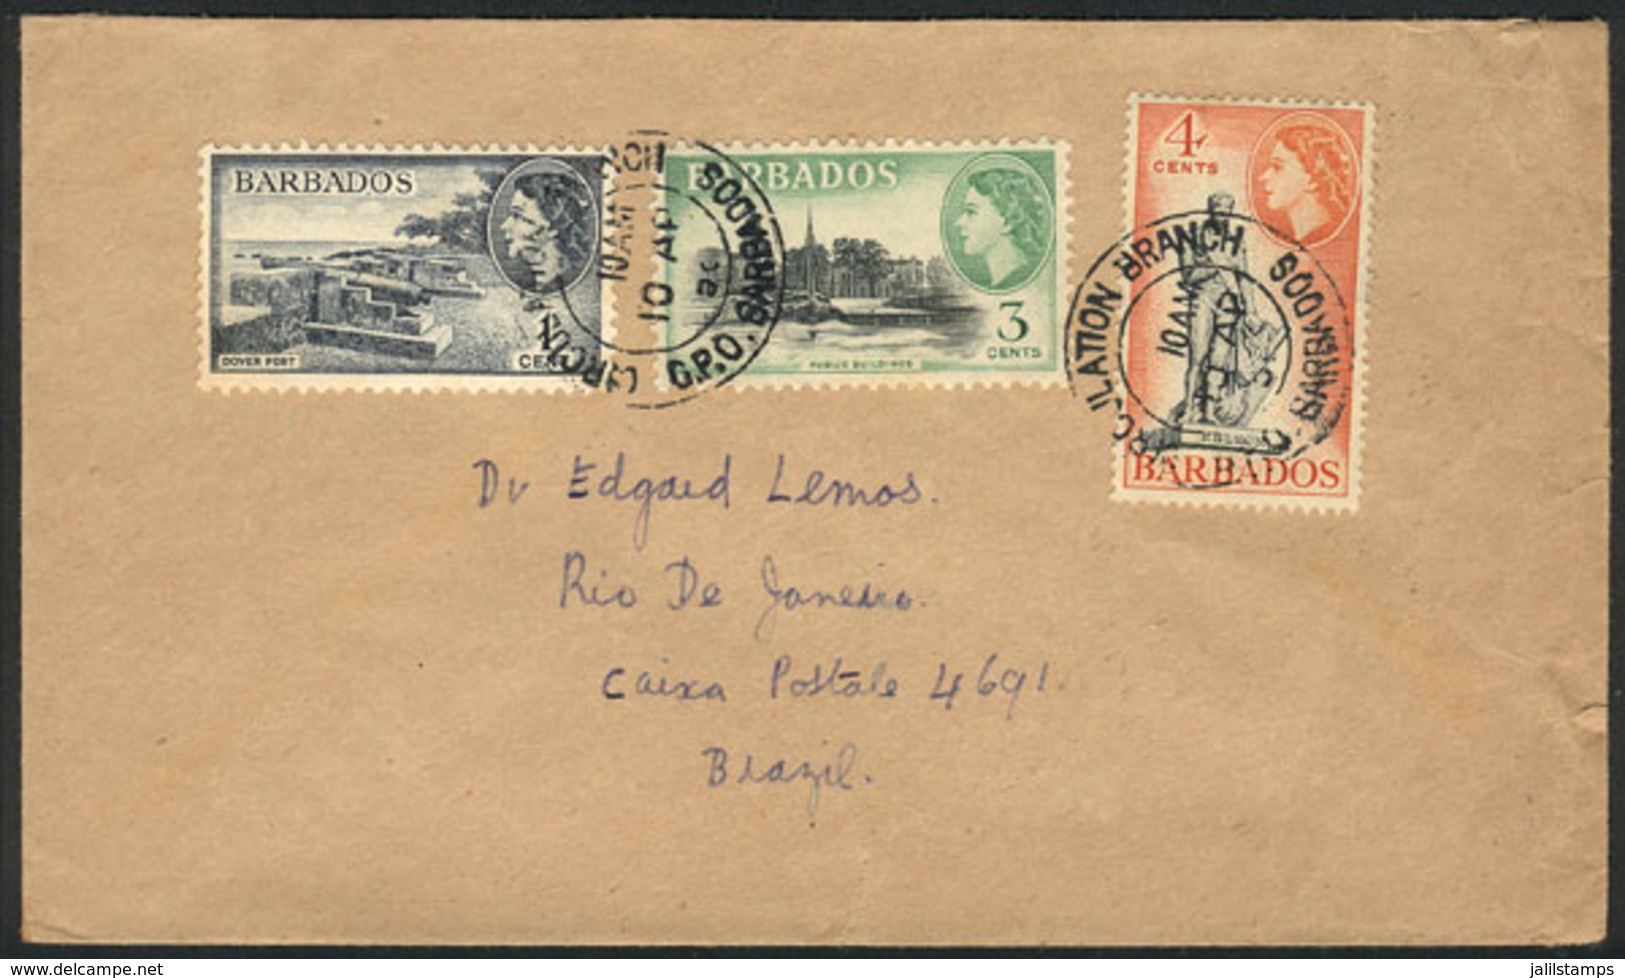 BARBADOS: Cover Sent To Brazil On 10/AP/1950 Franked With 8c., Very Nice, Unusual Destination! - Barbados (...-1966)